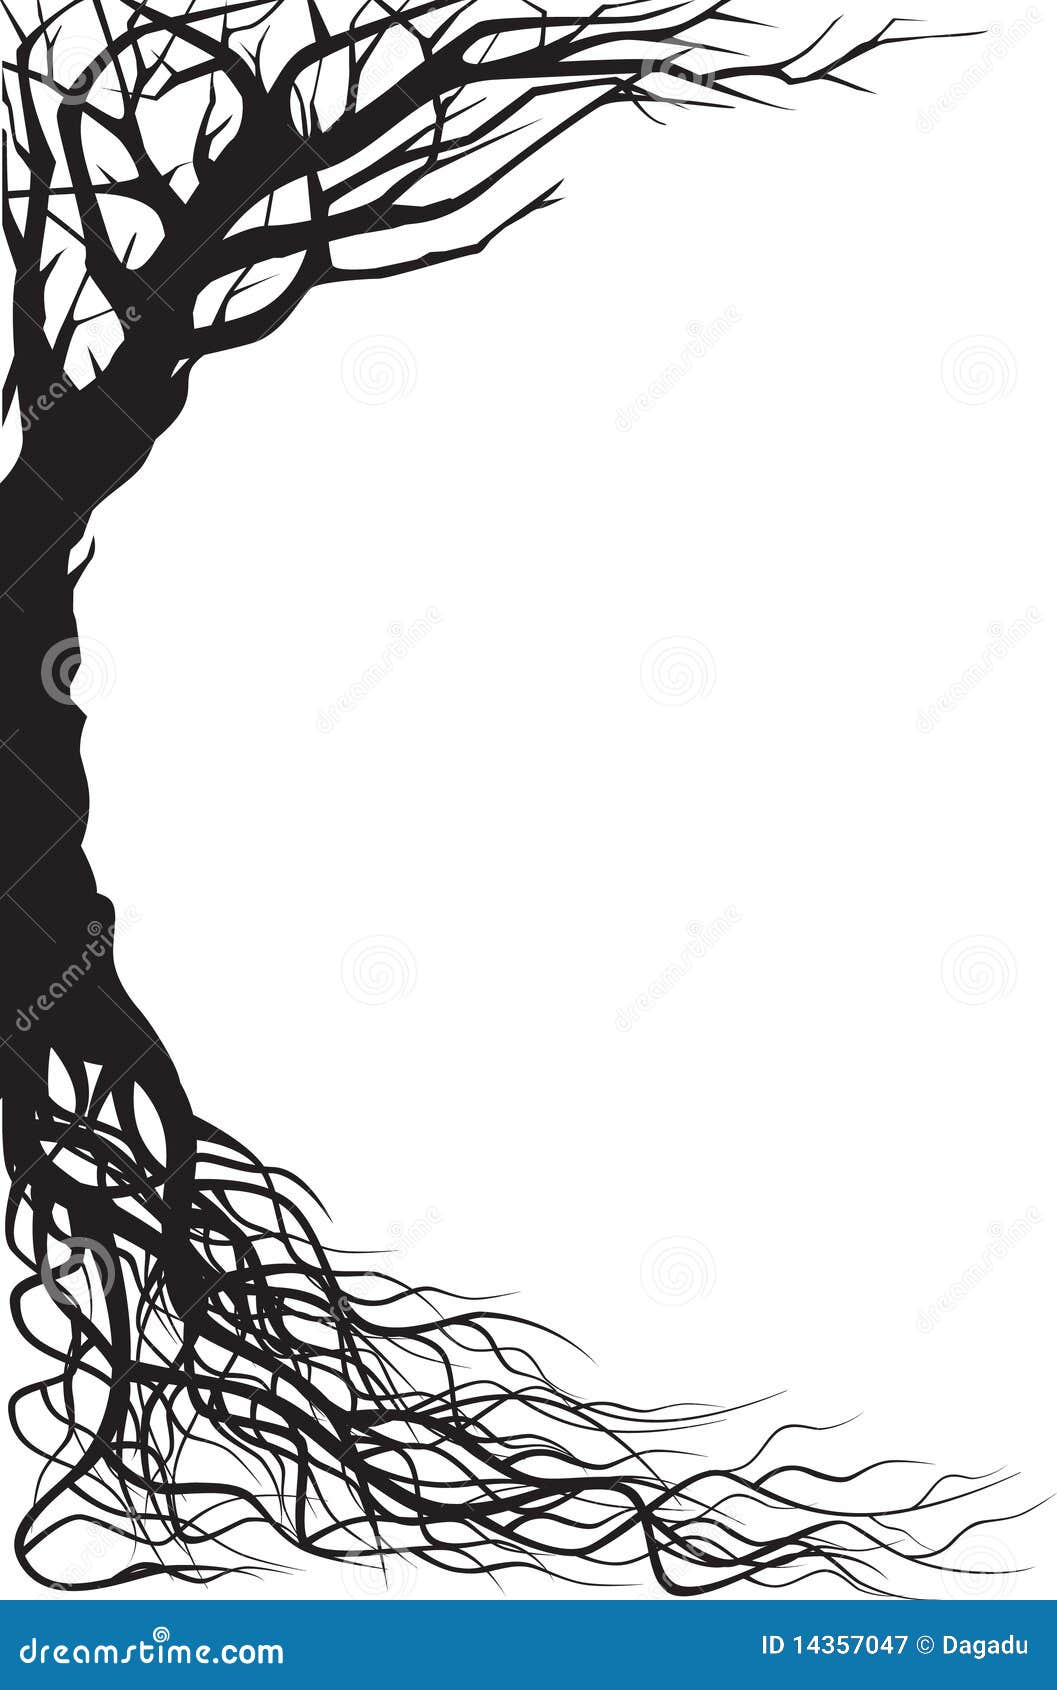 Tree Silhouette Royalty Free Stock Photography - Image ...